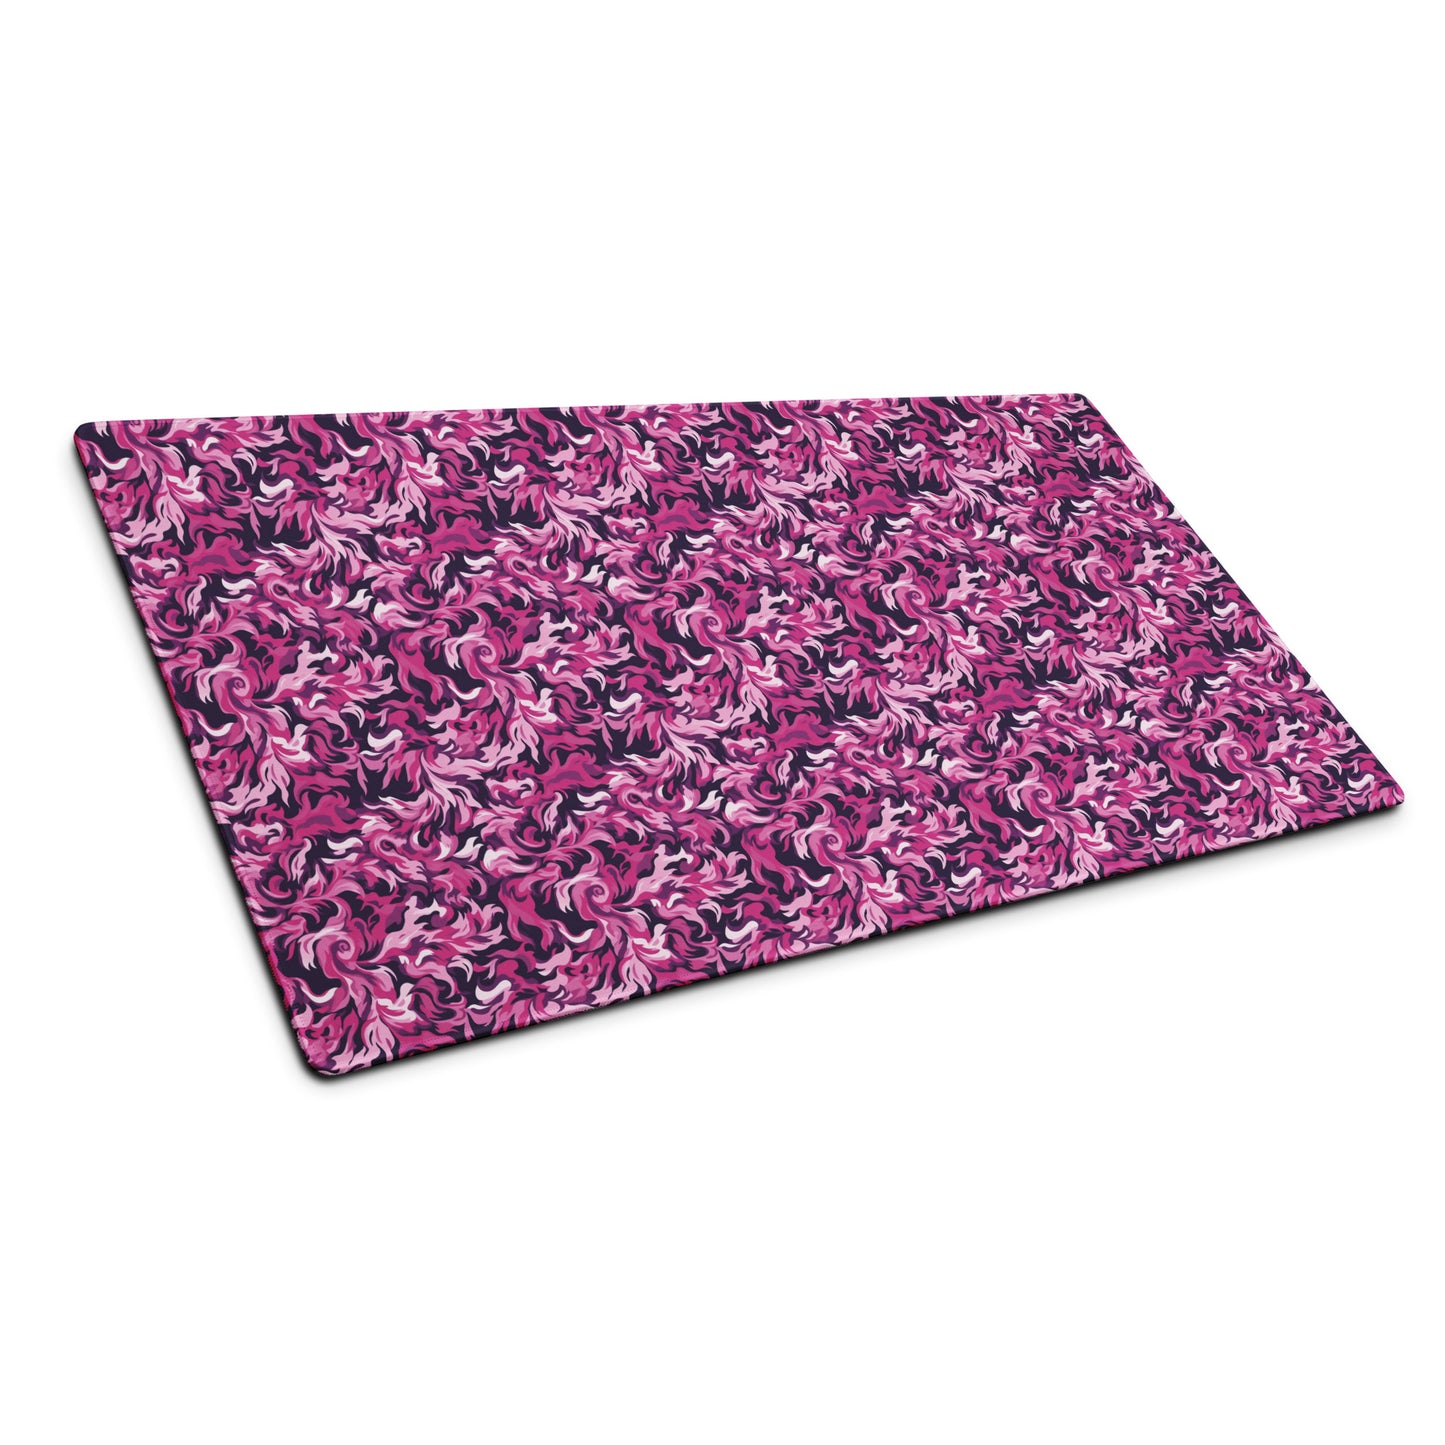 A 36" x 18" desk pad with a pink and magenta camo pattern sitting at an angle.